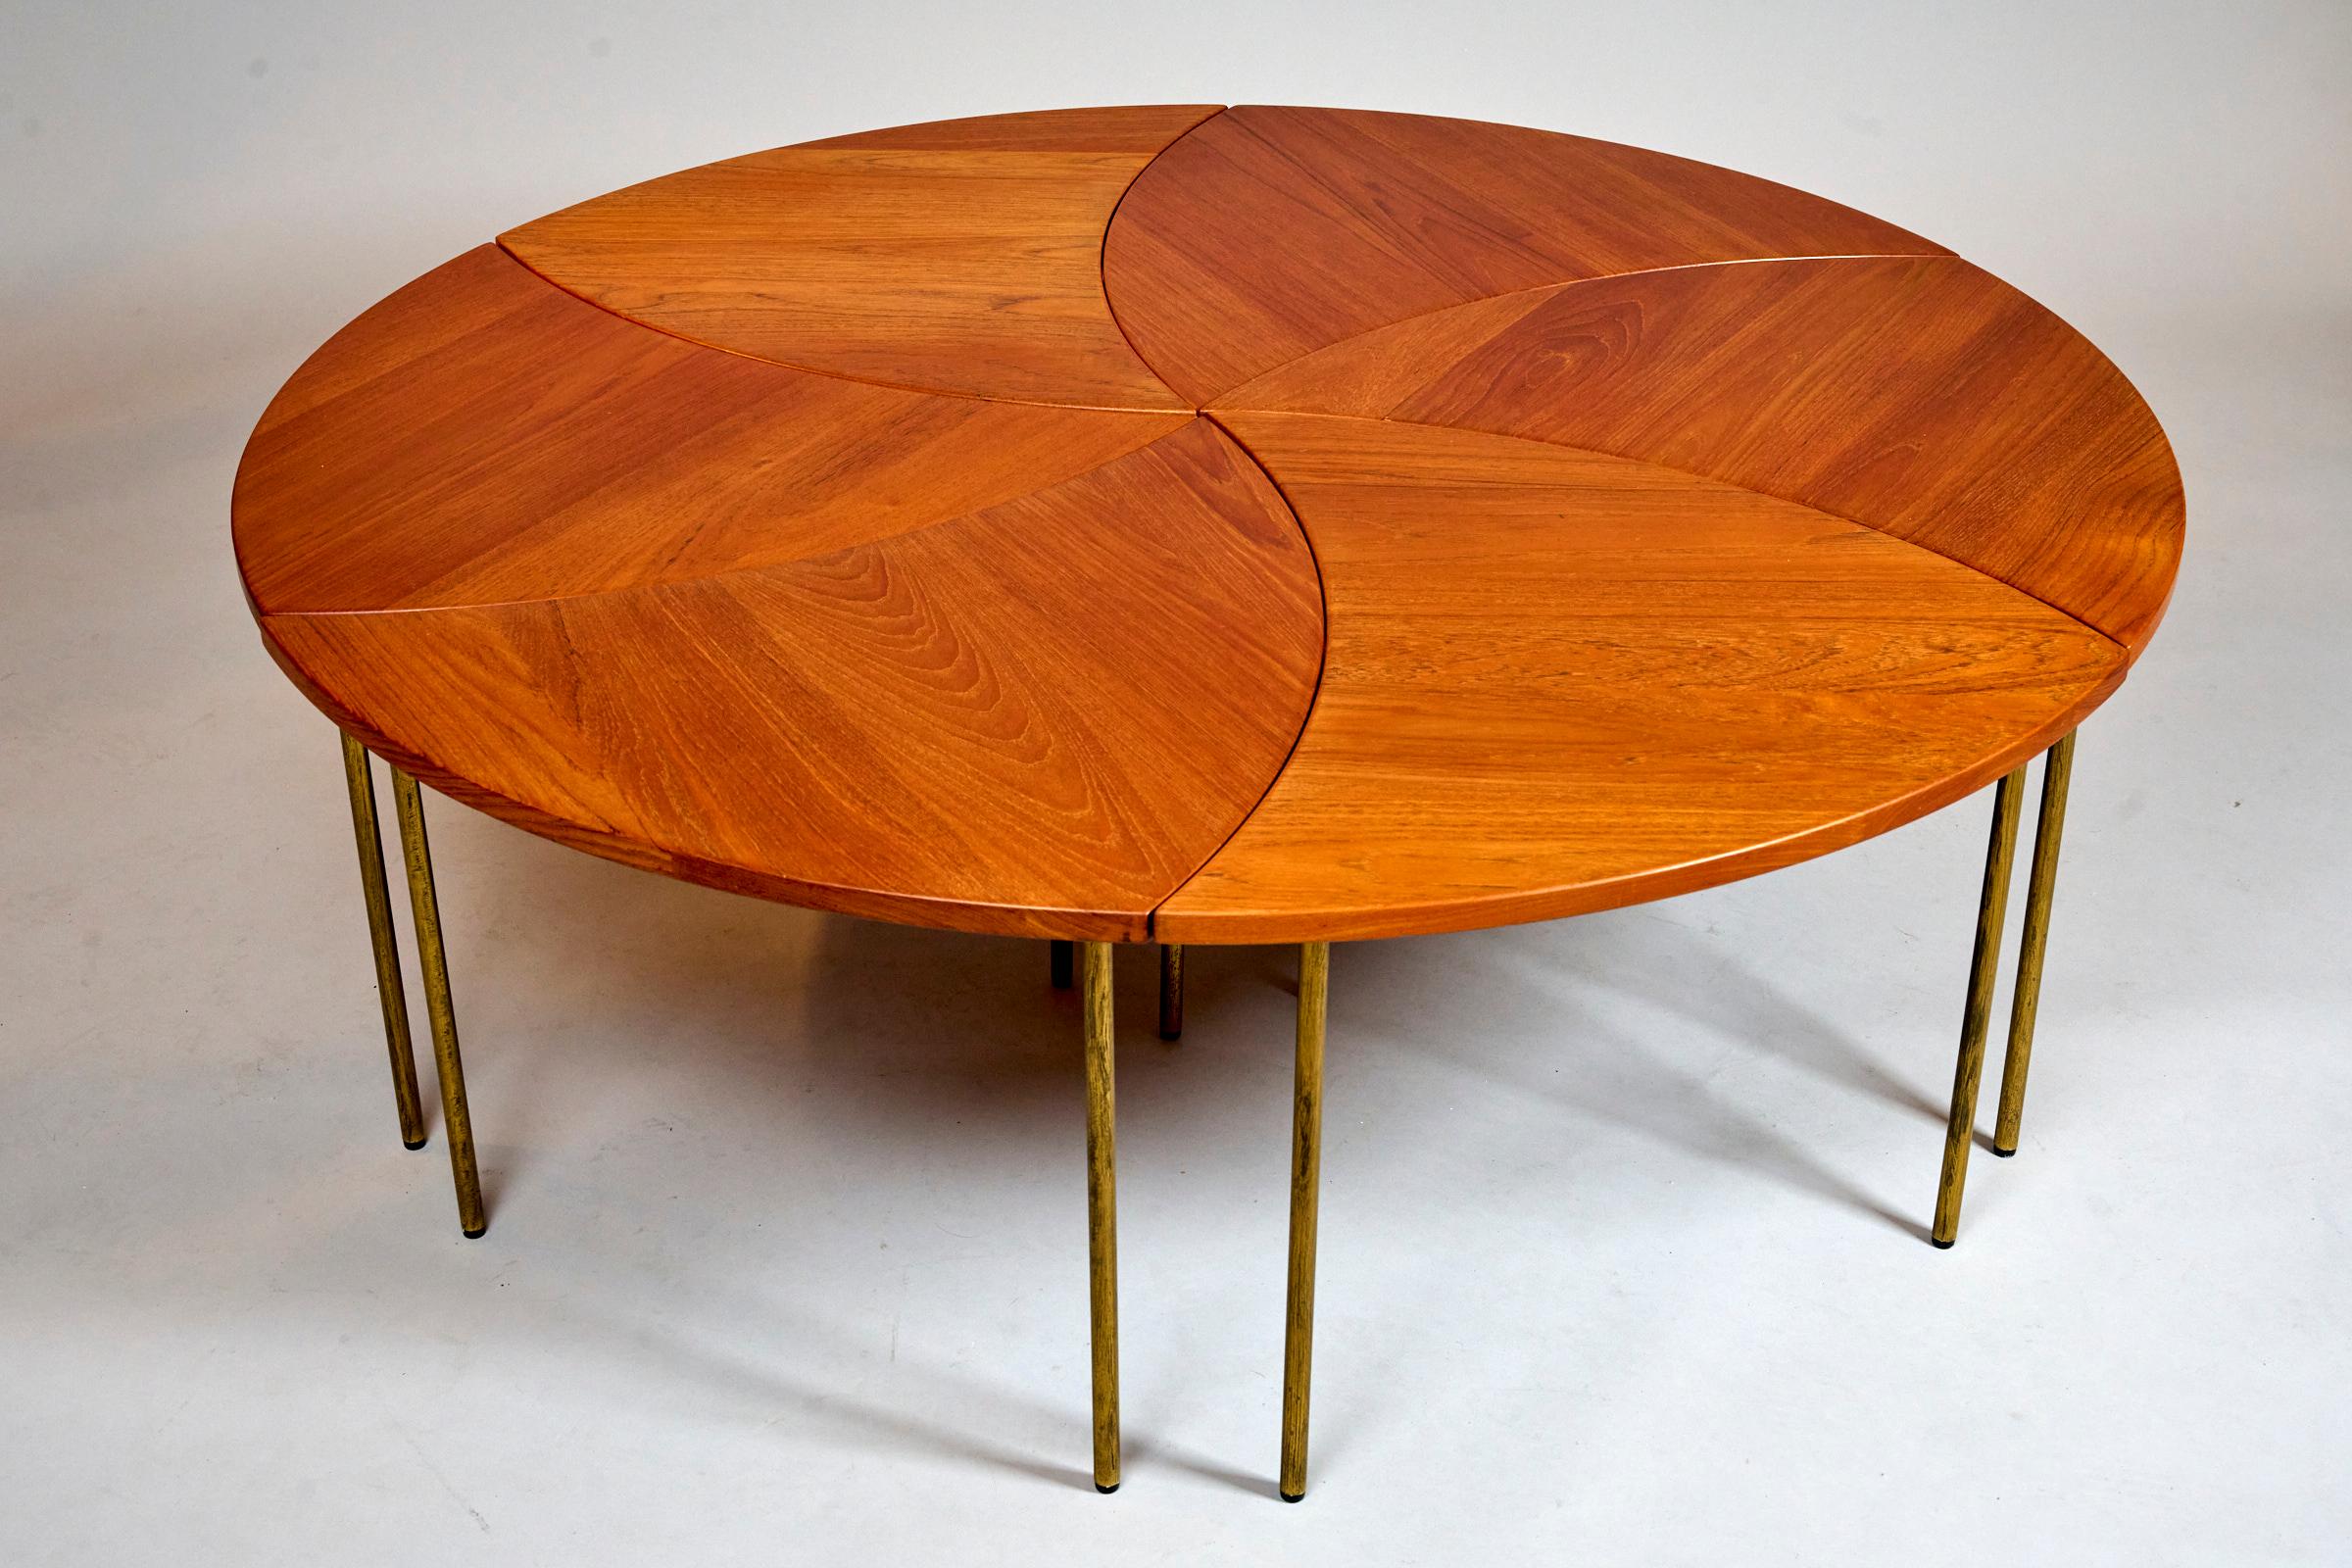 Original 'pinwheel' table by Peter Hvidt and Orla Molgaard. 
Denmark 1953

Solid teak with brass legs.

Comprises of six individual tables which can be configured in a variety of shapes... the tables can be used as large central table or